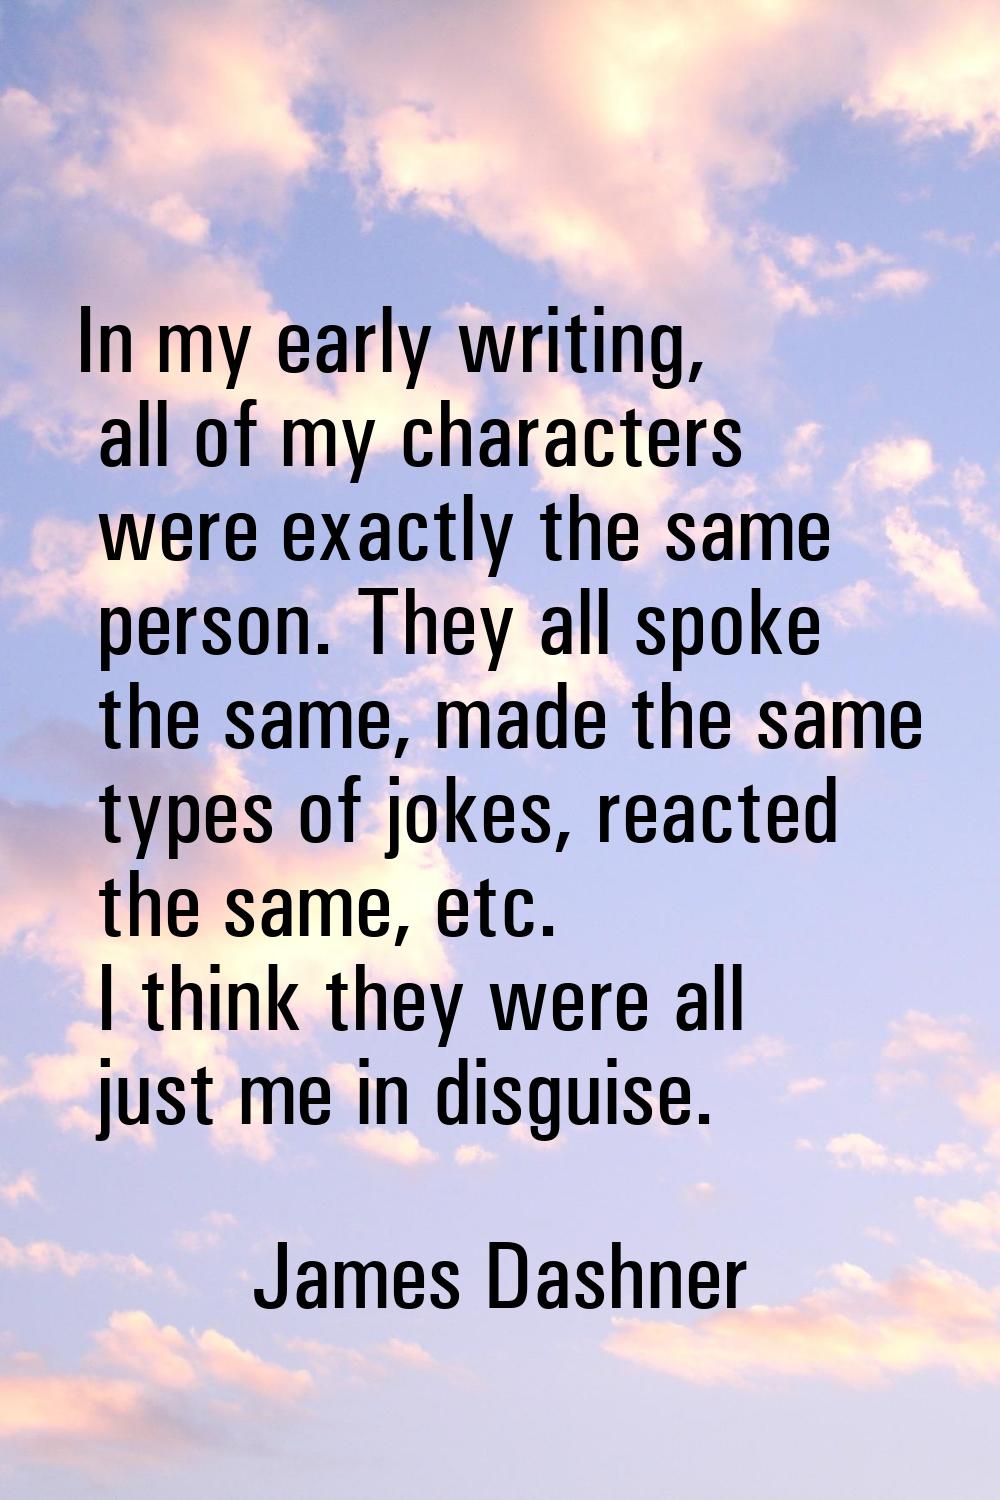 In my early writing, all of my characters were exactly the same person. They all spoke the same, ma